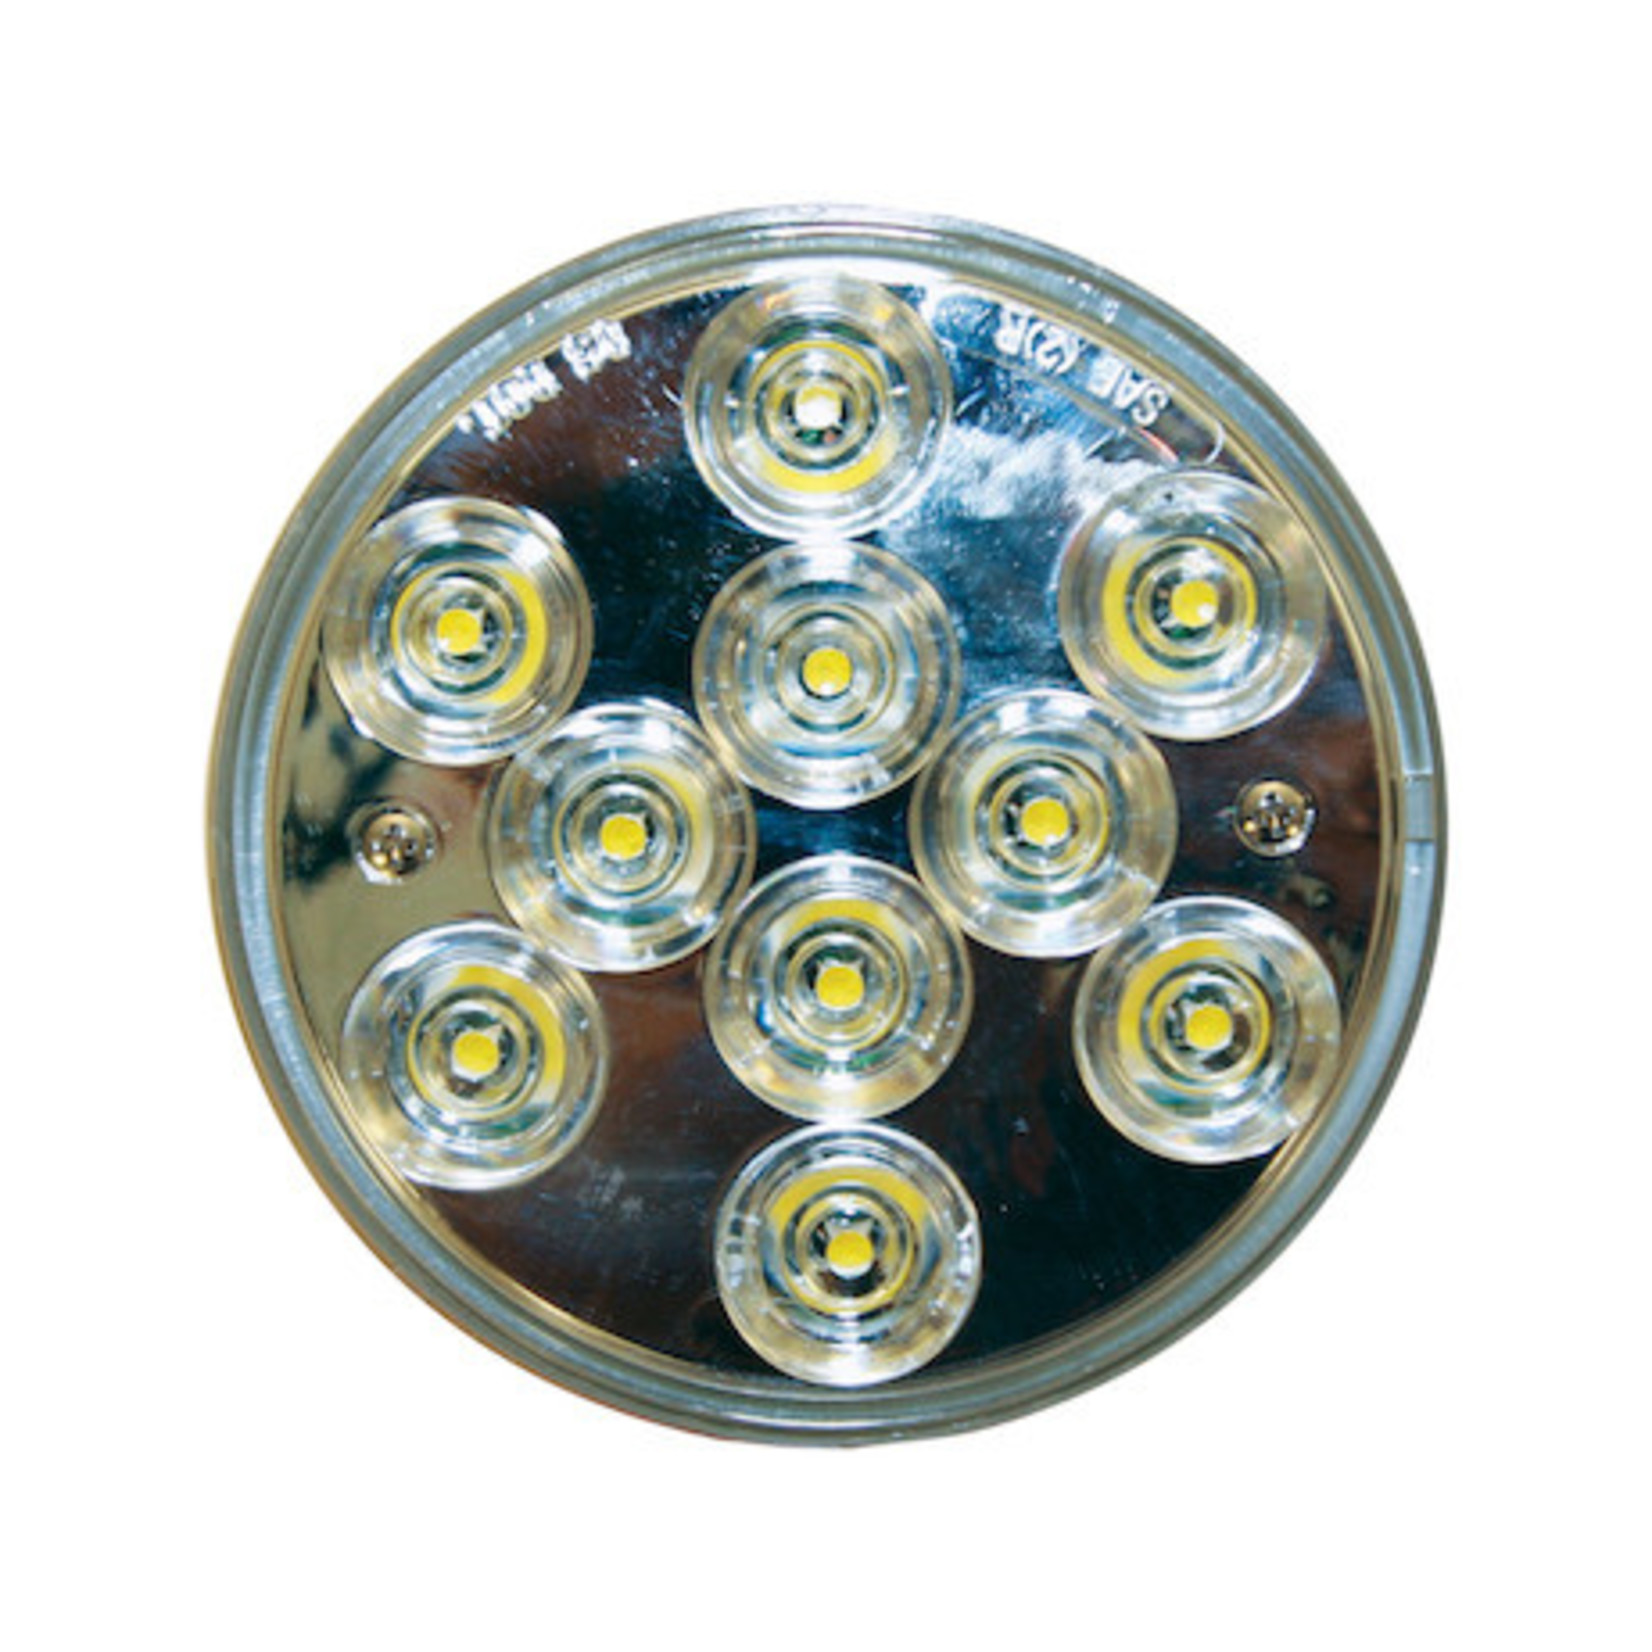 Buyers Products Company 4 Inch Clear Round Backup Light With 10 LEDs